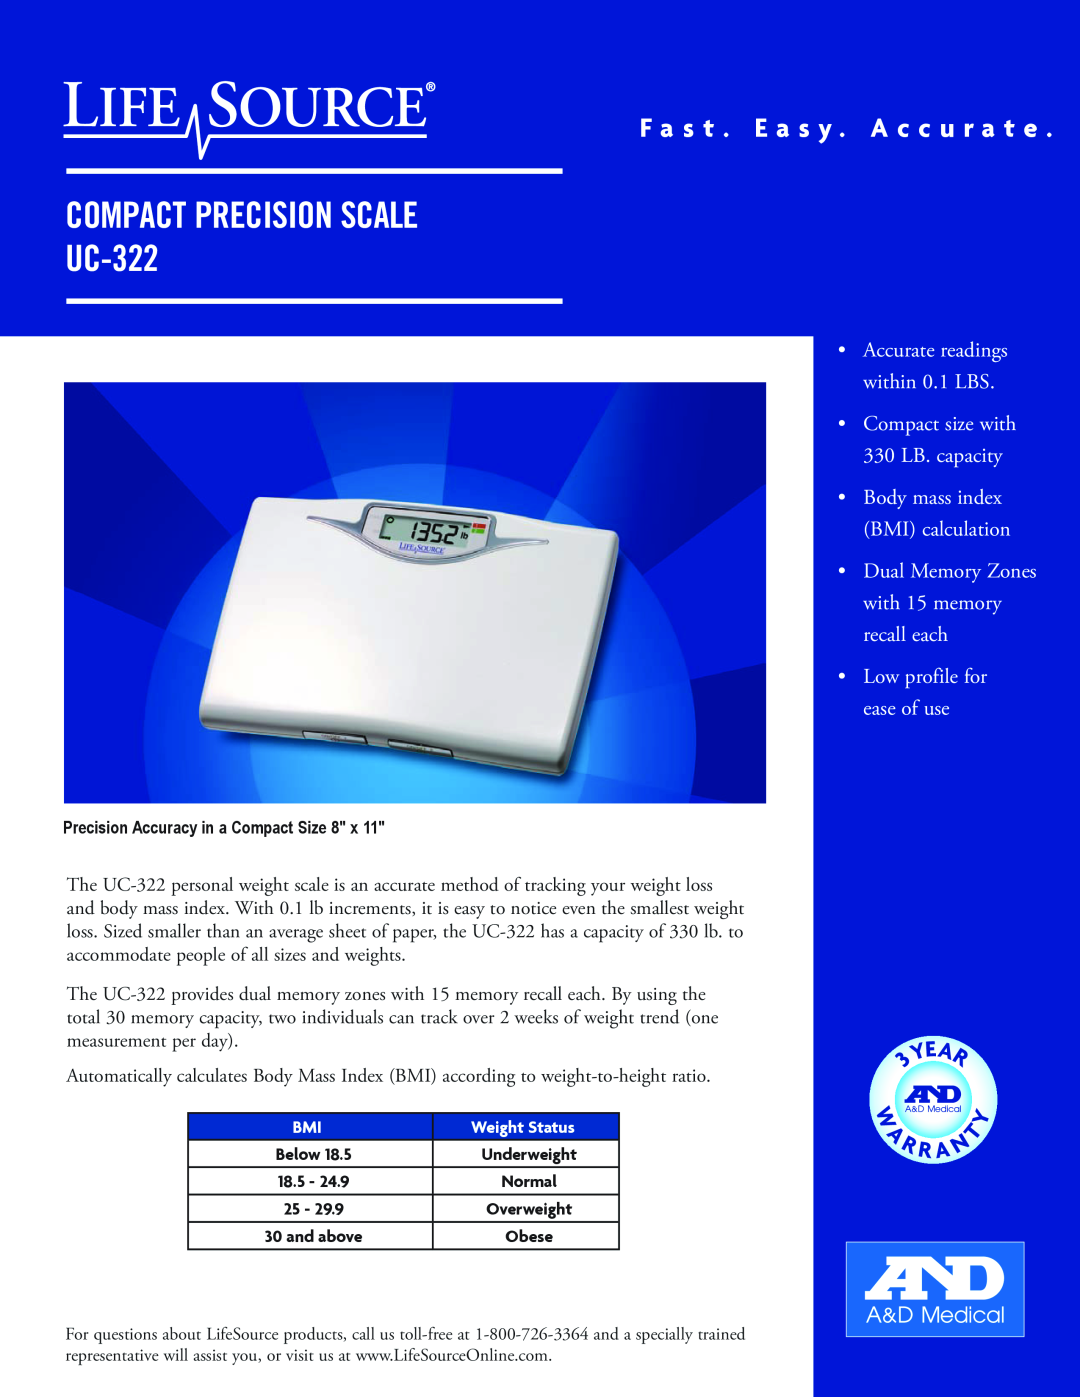 A&D manual Compact Precision scale UC-322, F a s t . E a s y . A c c u r a t e, Low profile for ease of use 